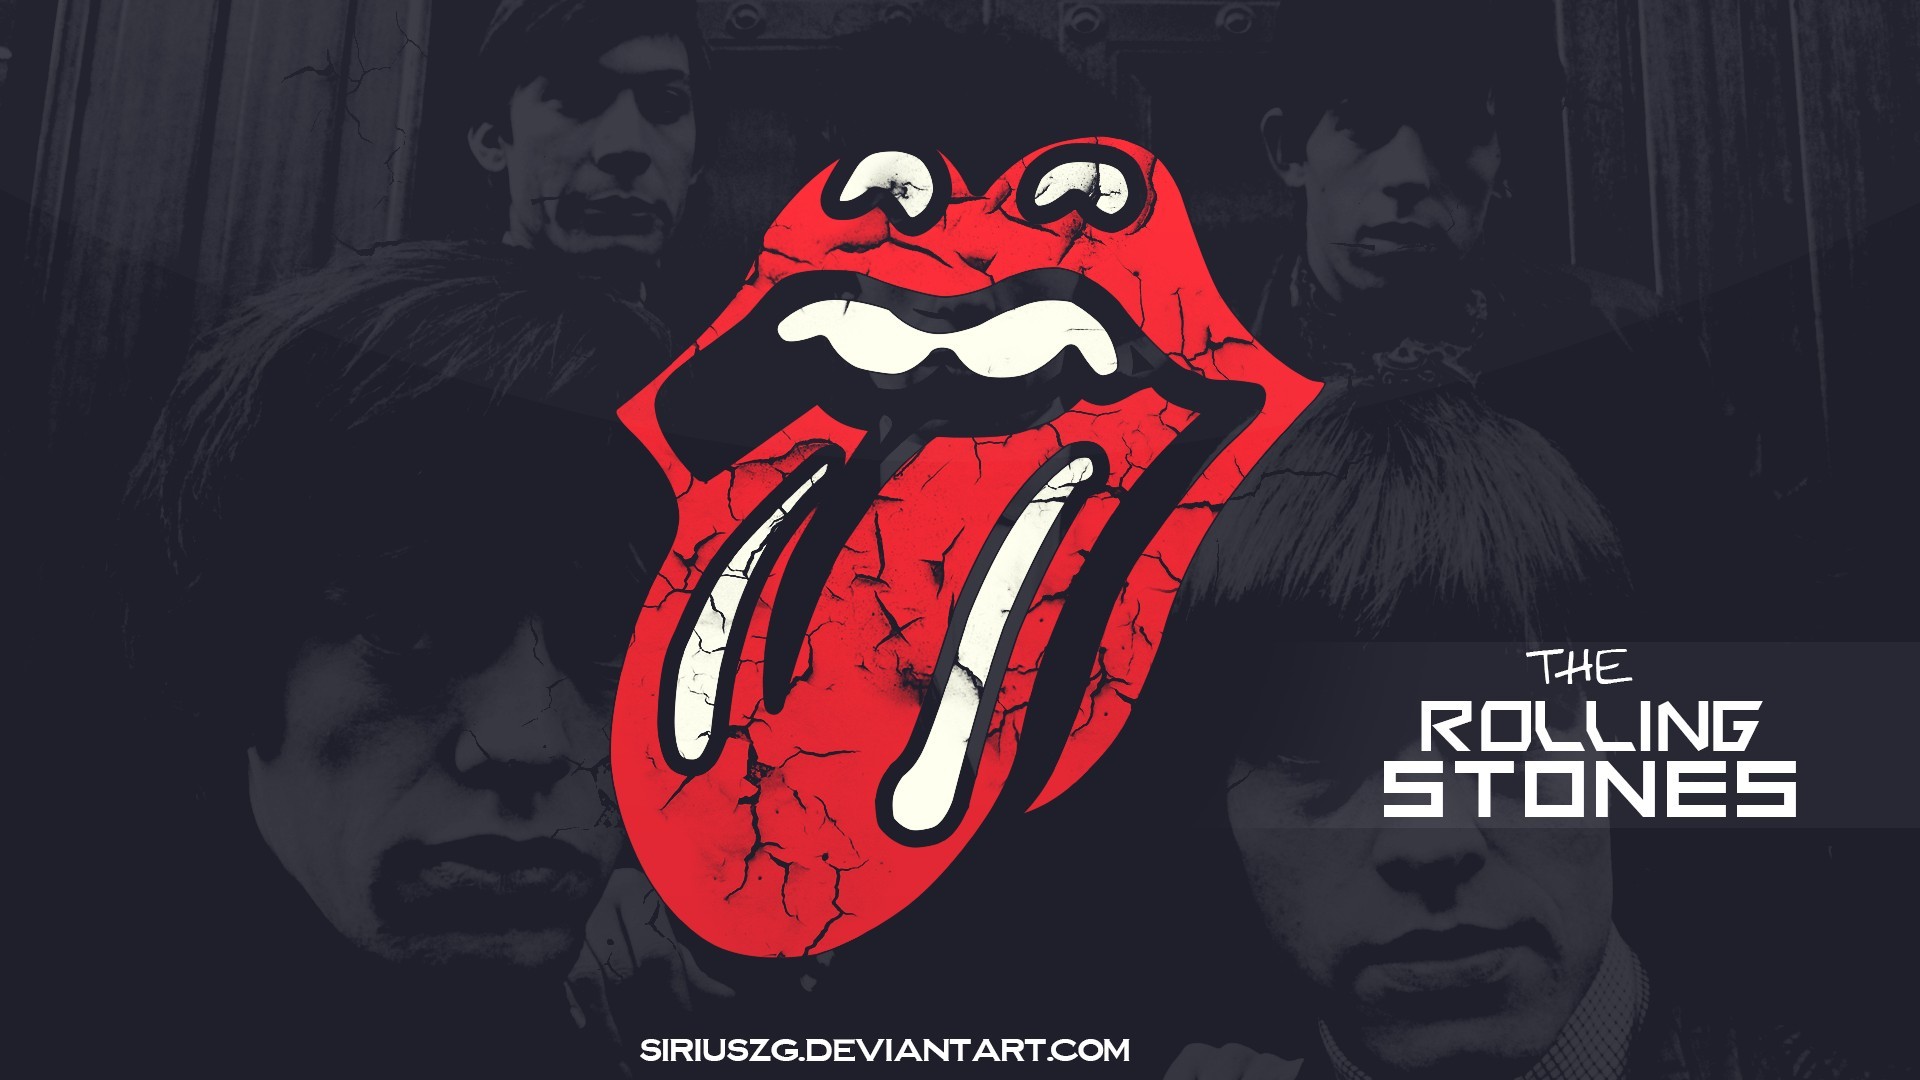 Rock band music rolling stones the cover art wallpaper